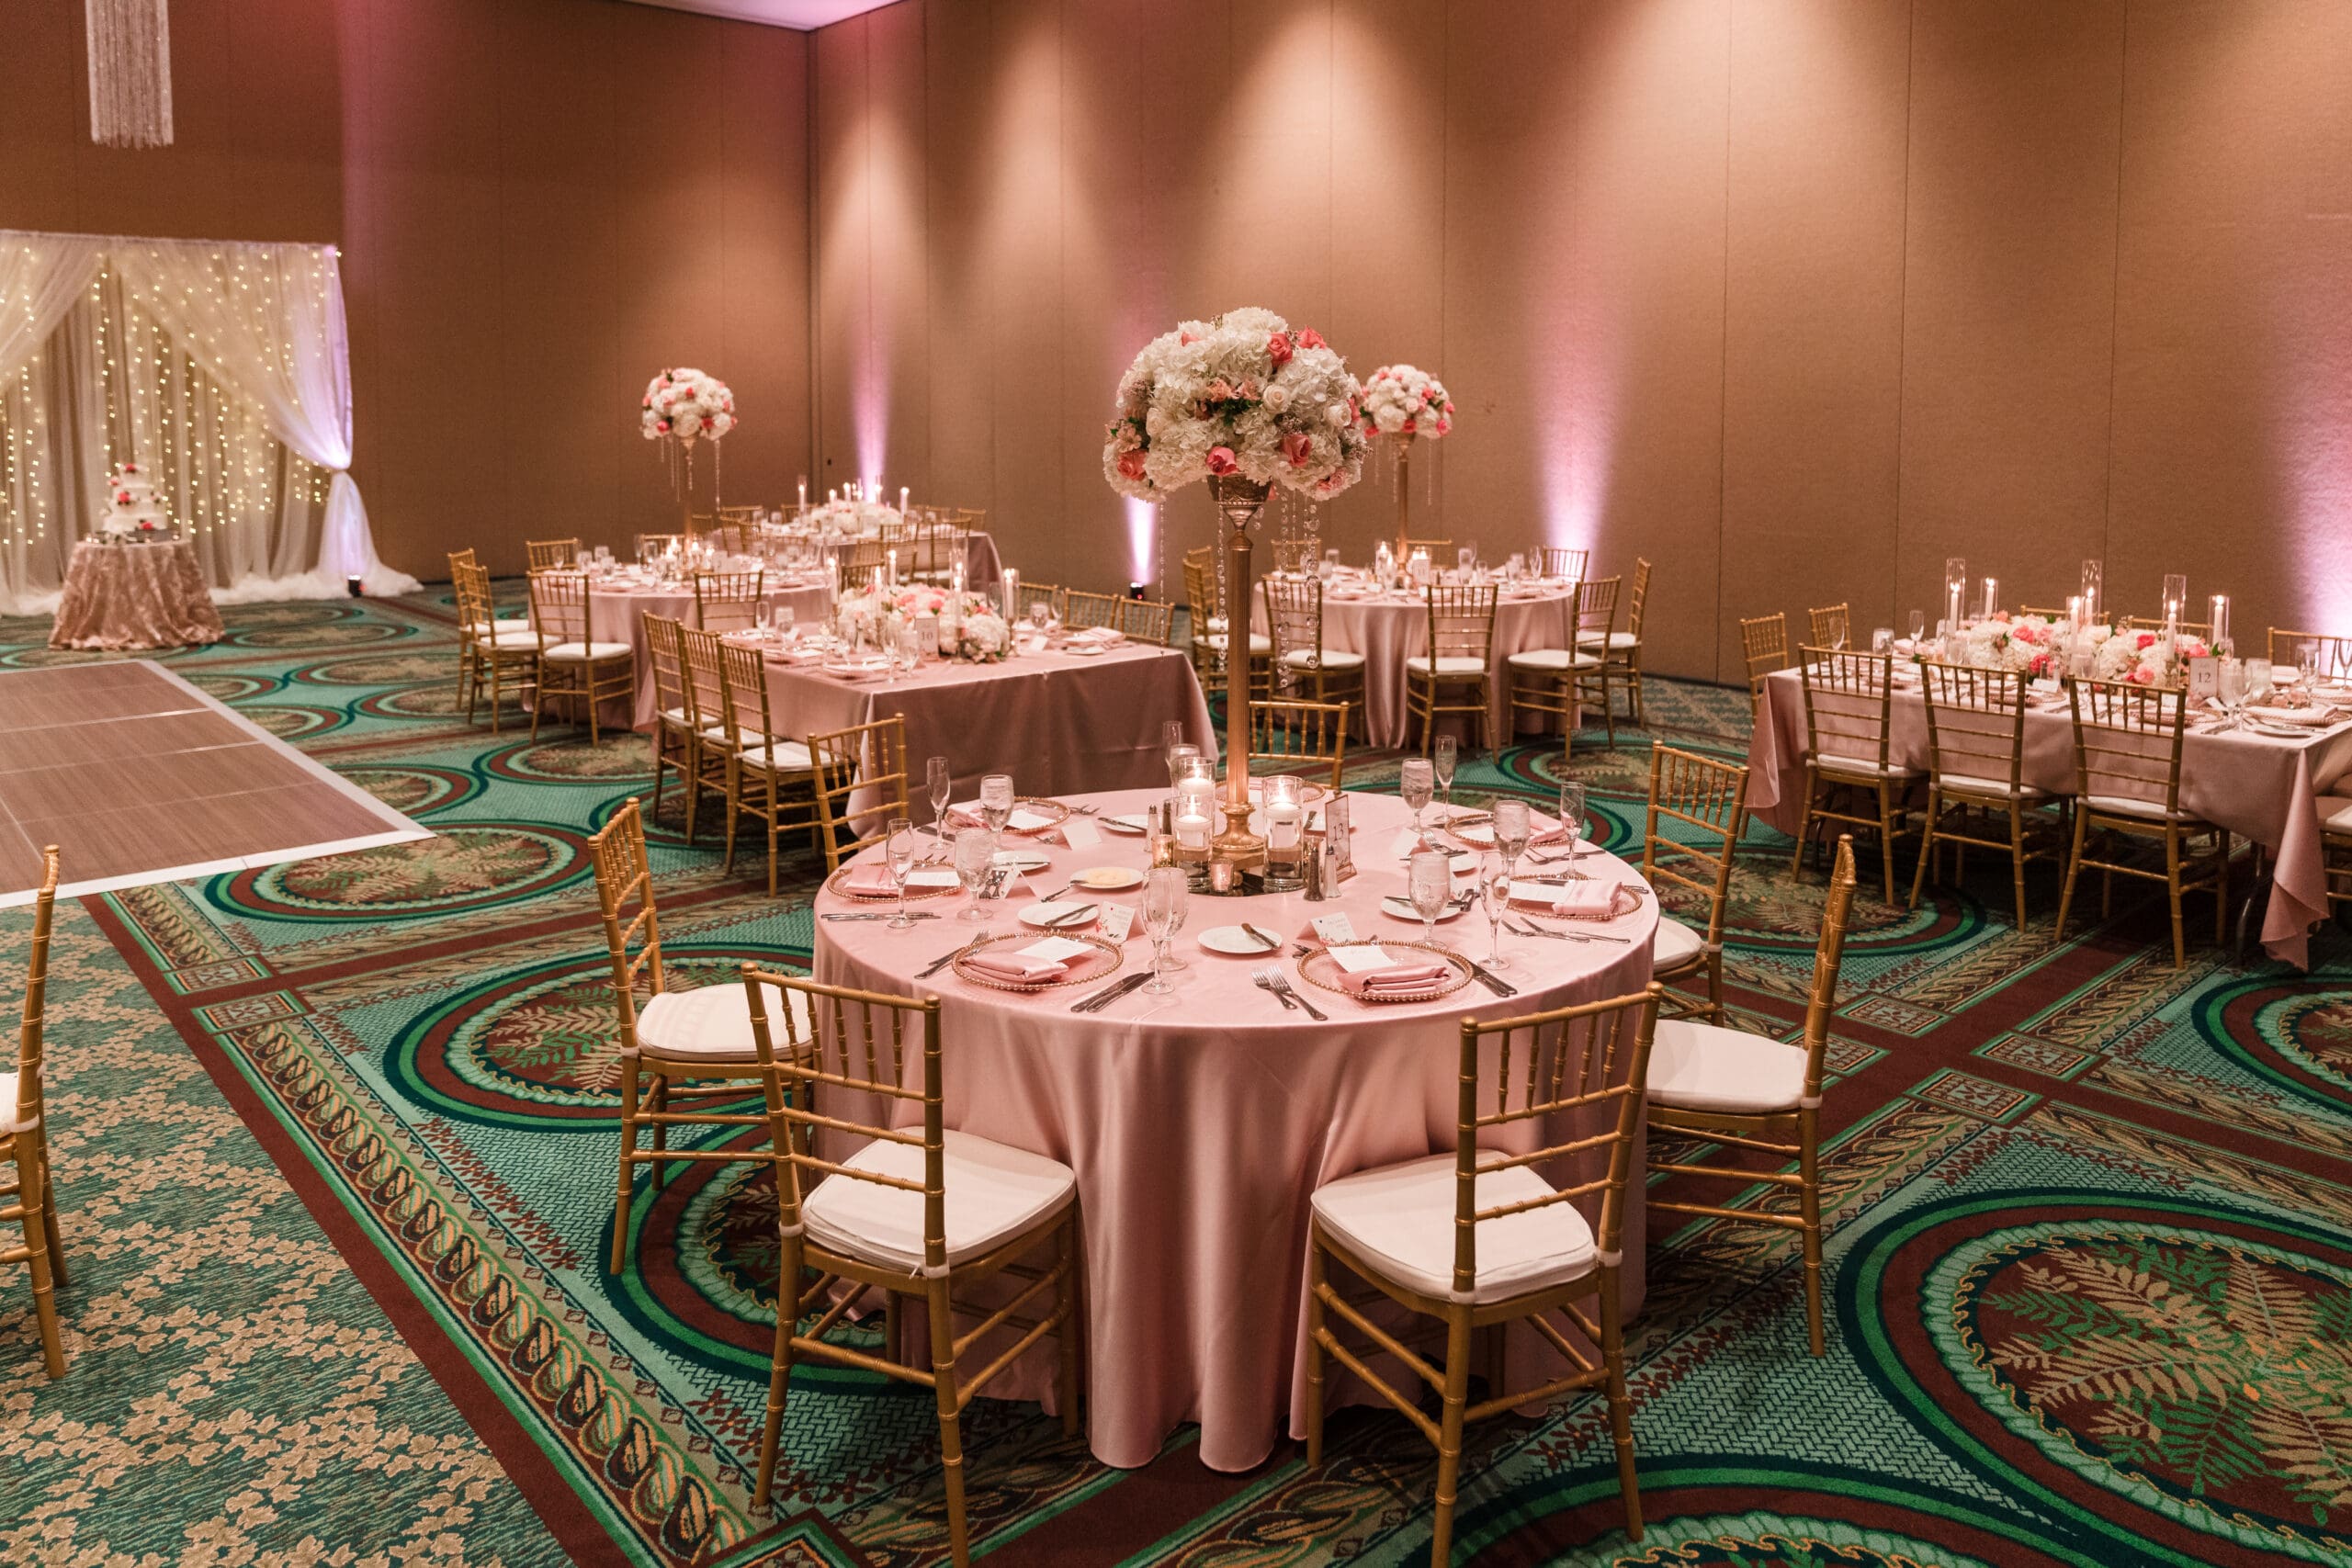 Empty reception area before the wedding ceremony at Orlando Royale Caribe Reception, featuring pink tablecloths, white rose flower centerpieces with pink roses, and elegant decor